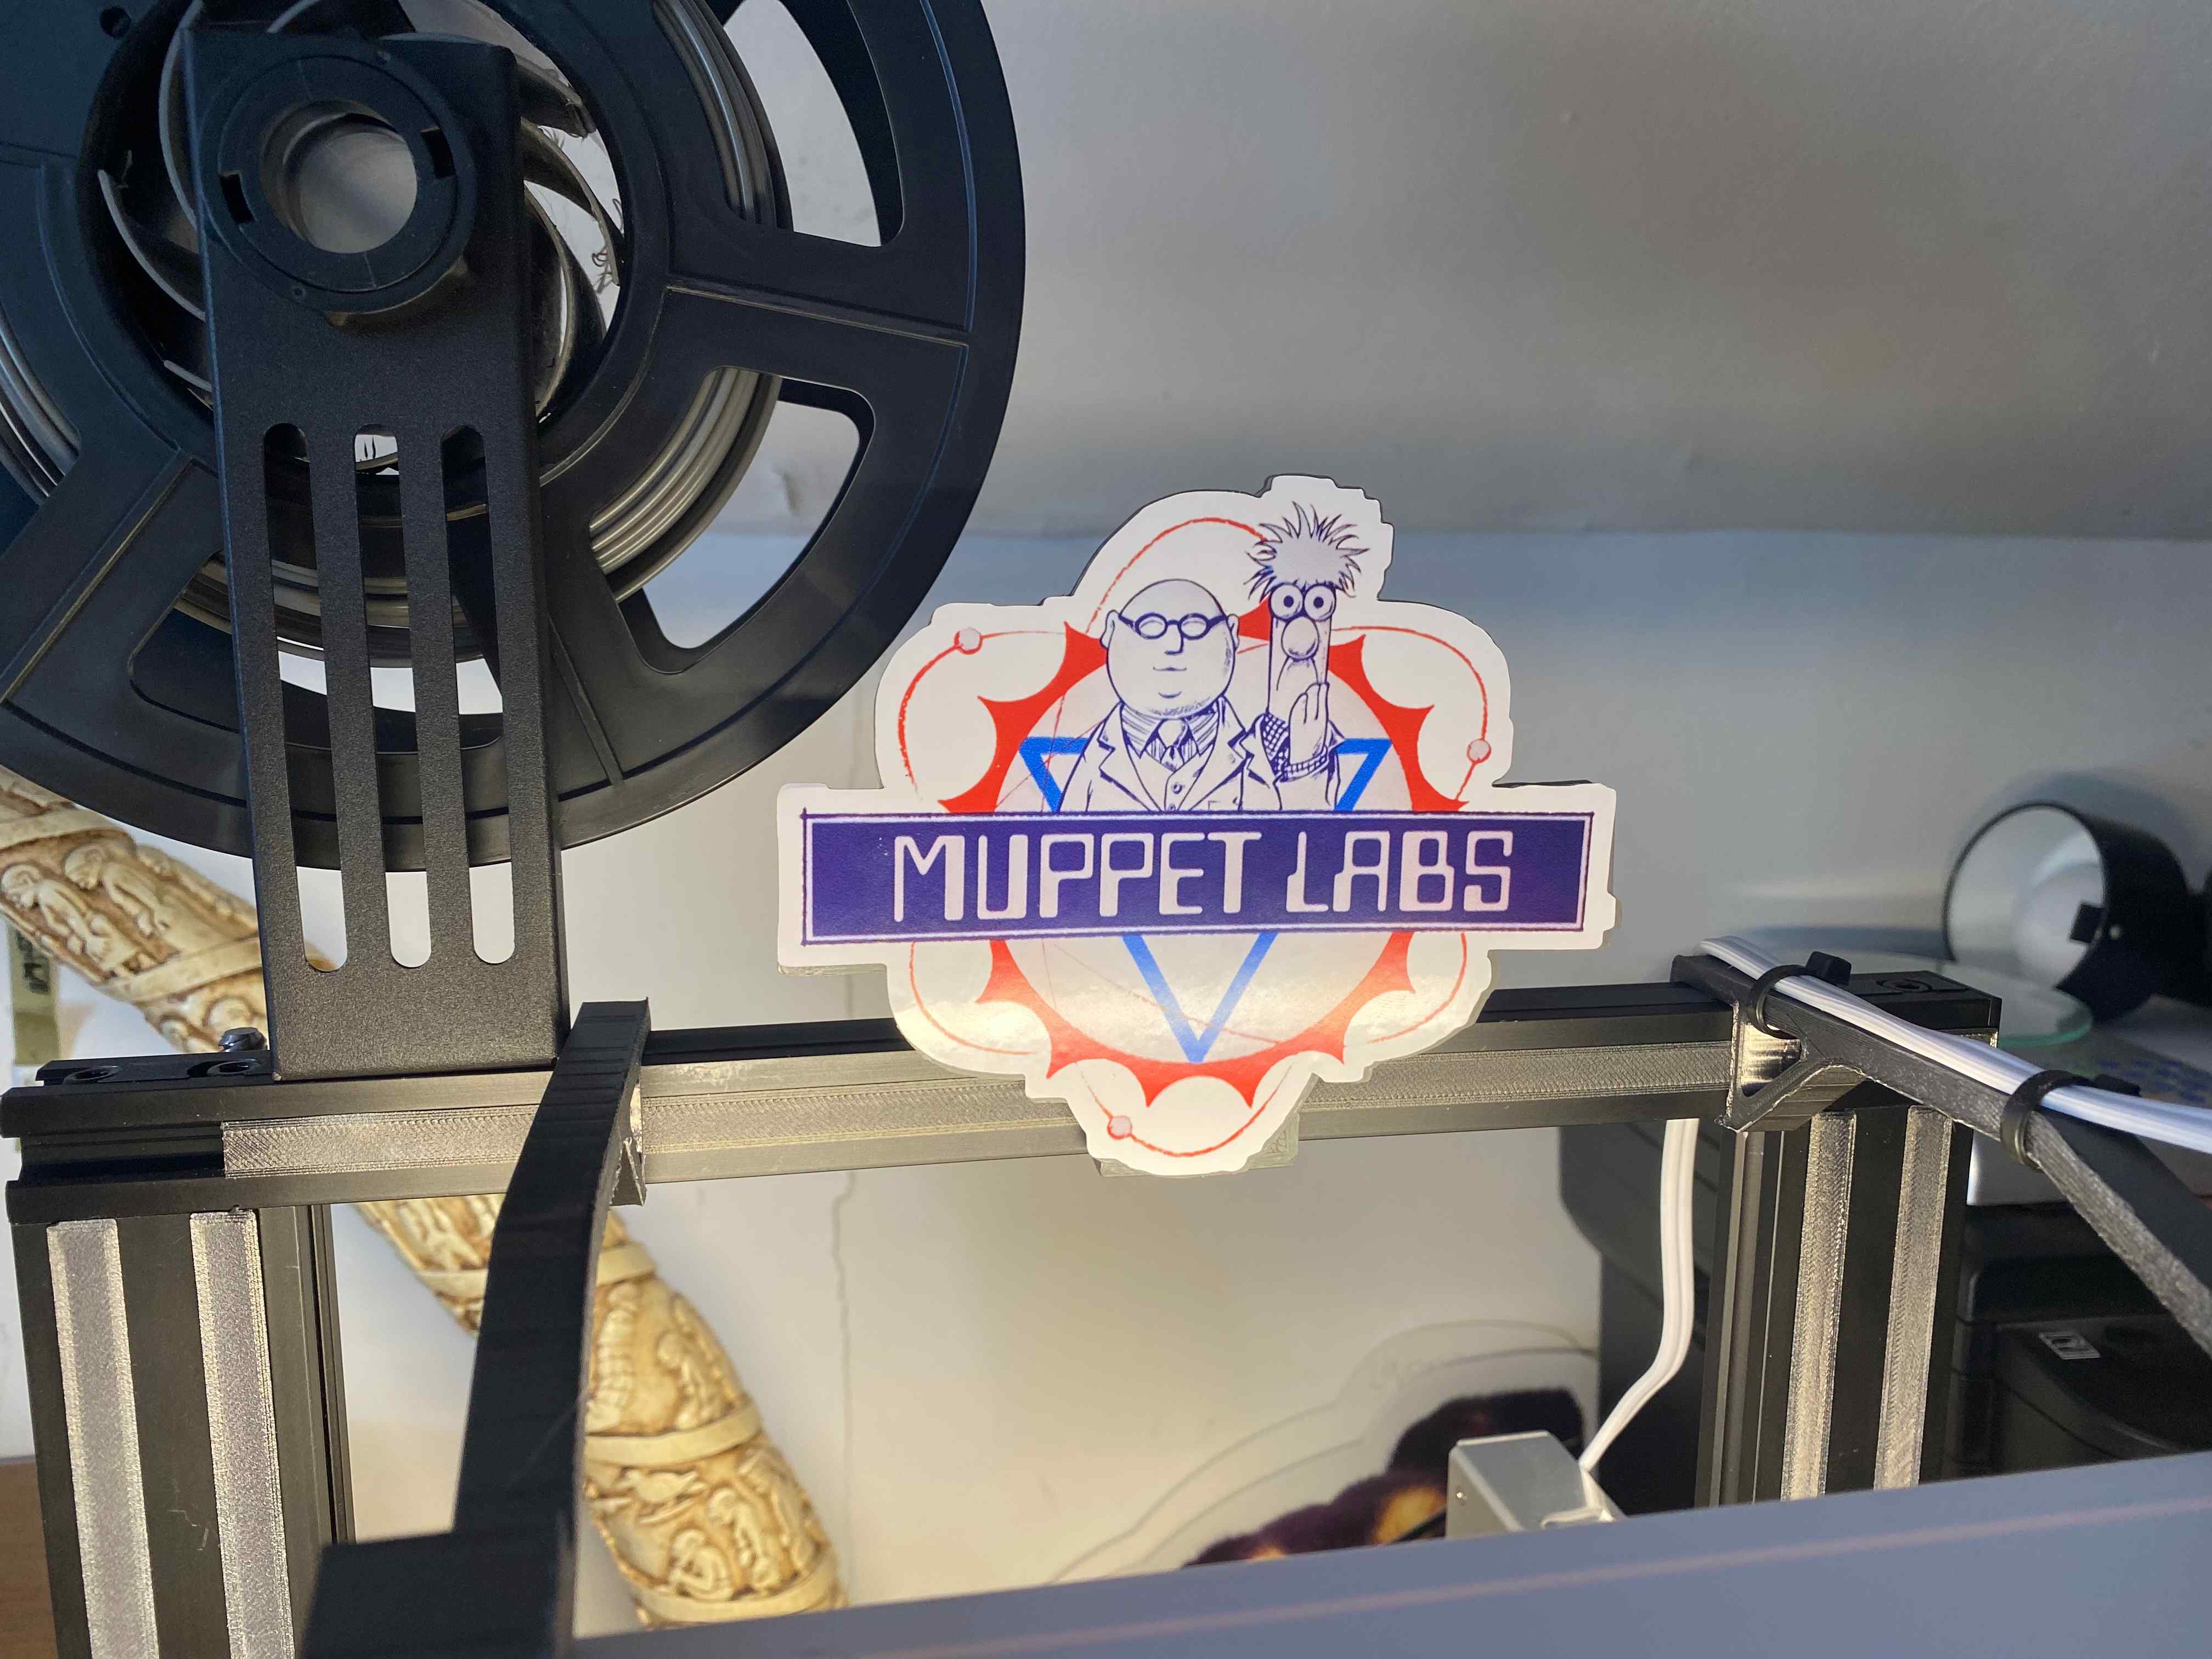 Muppet Labs sign